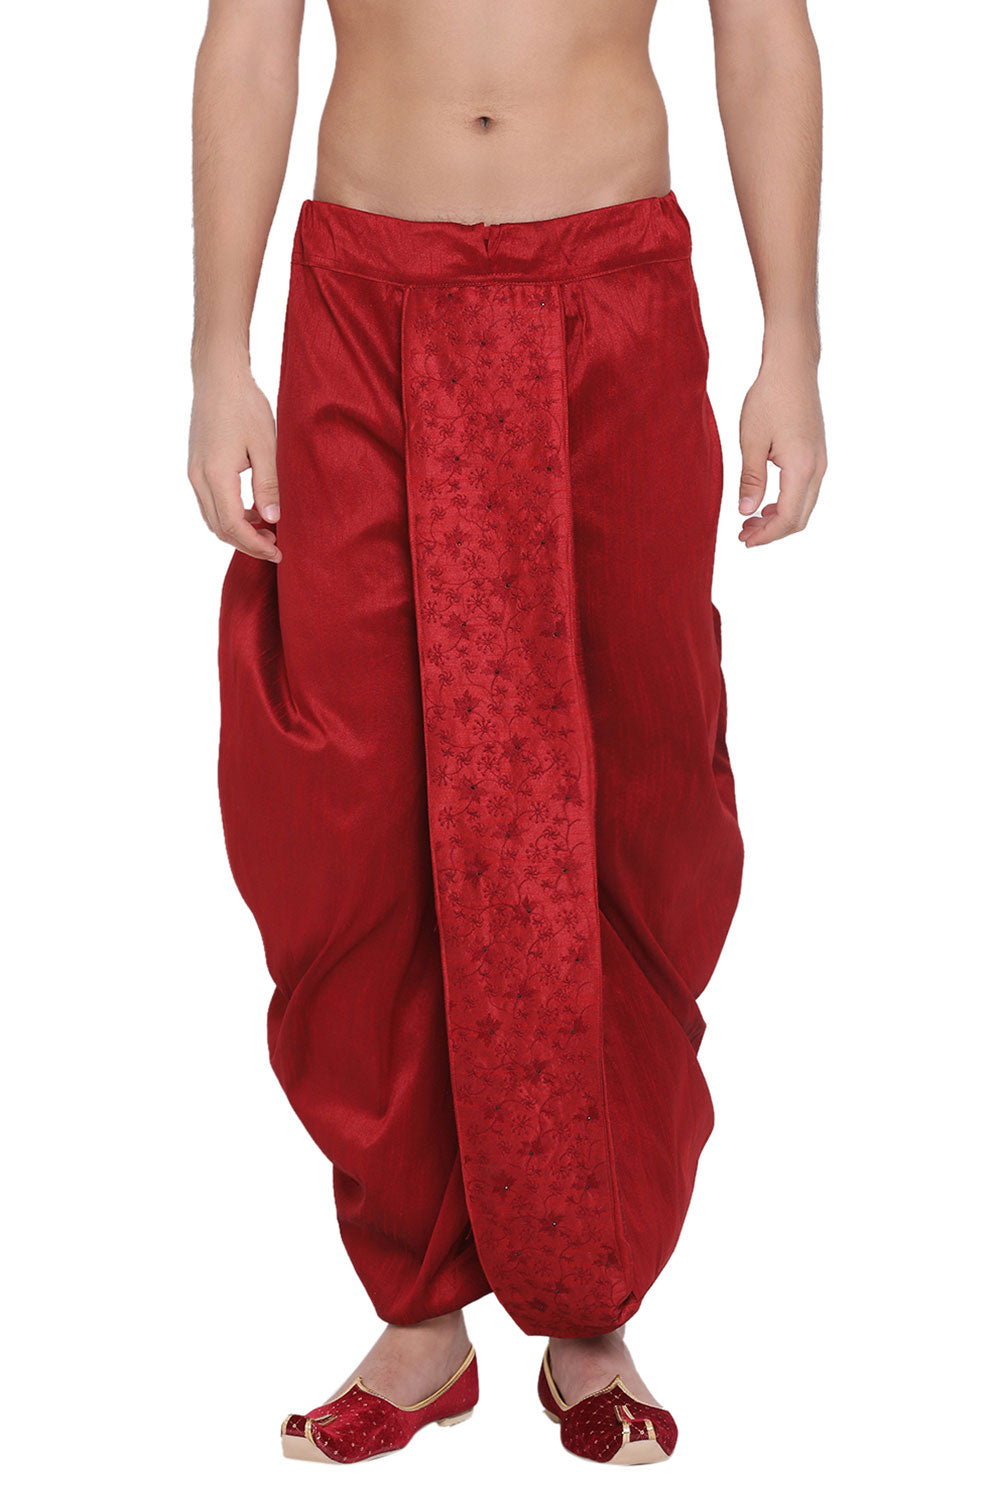 Buy Art Silk Embroidered Dhoti in Maroon